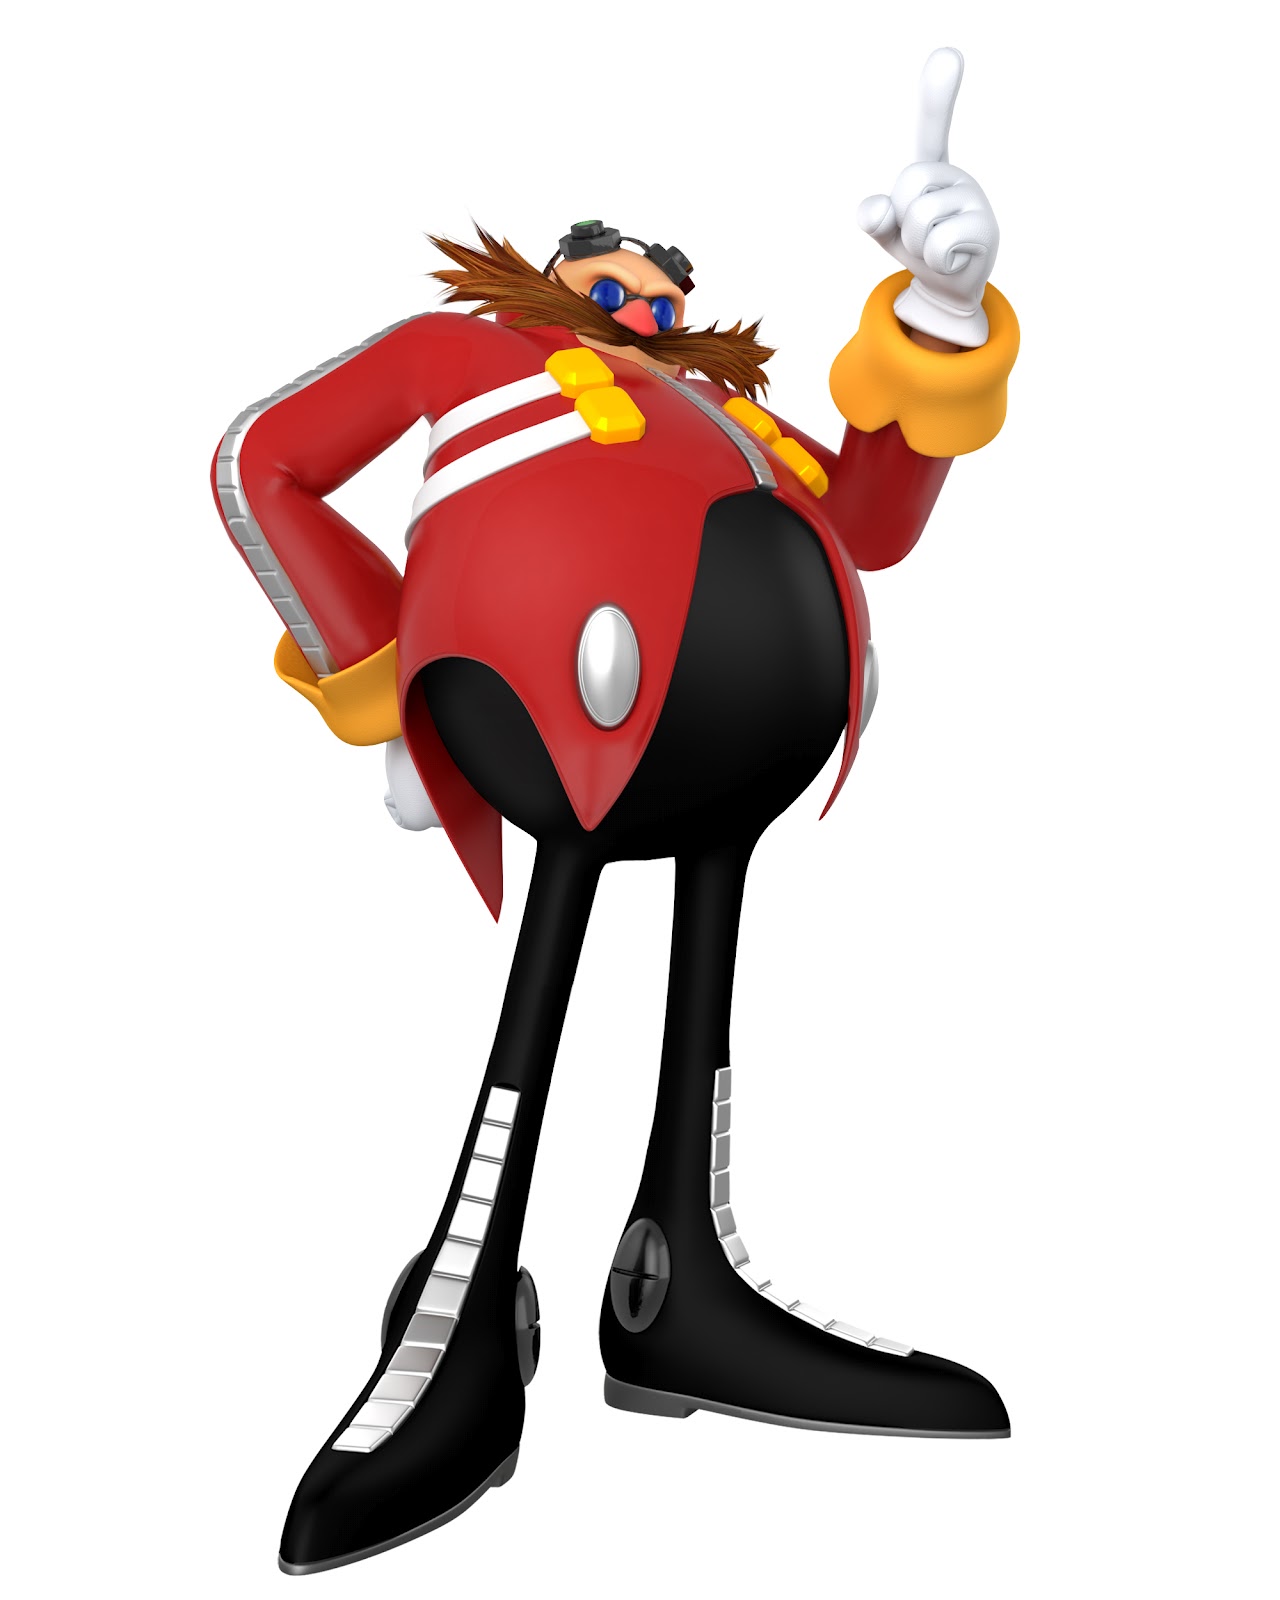 Join the Egg Empire Today and Help Build Eggmanland in Smash 4! Dr